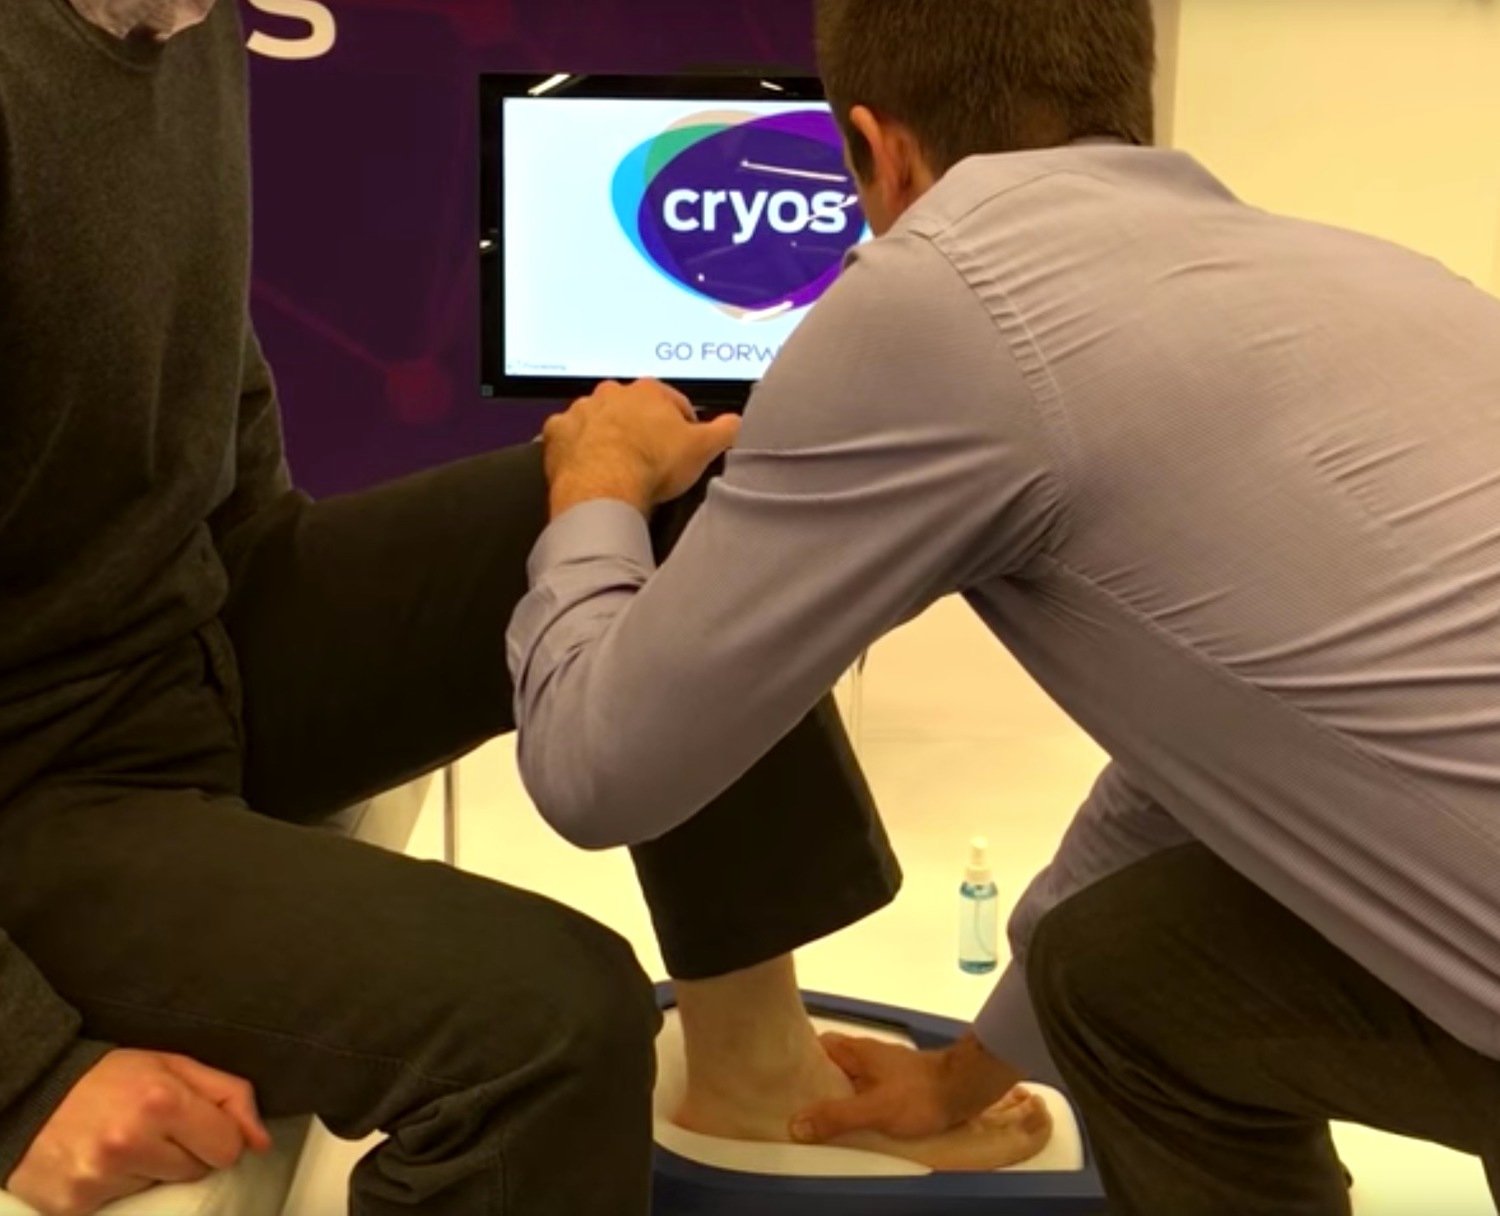  Cryoscan3D in action [Image: Fuel3D] 